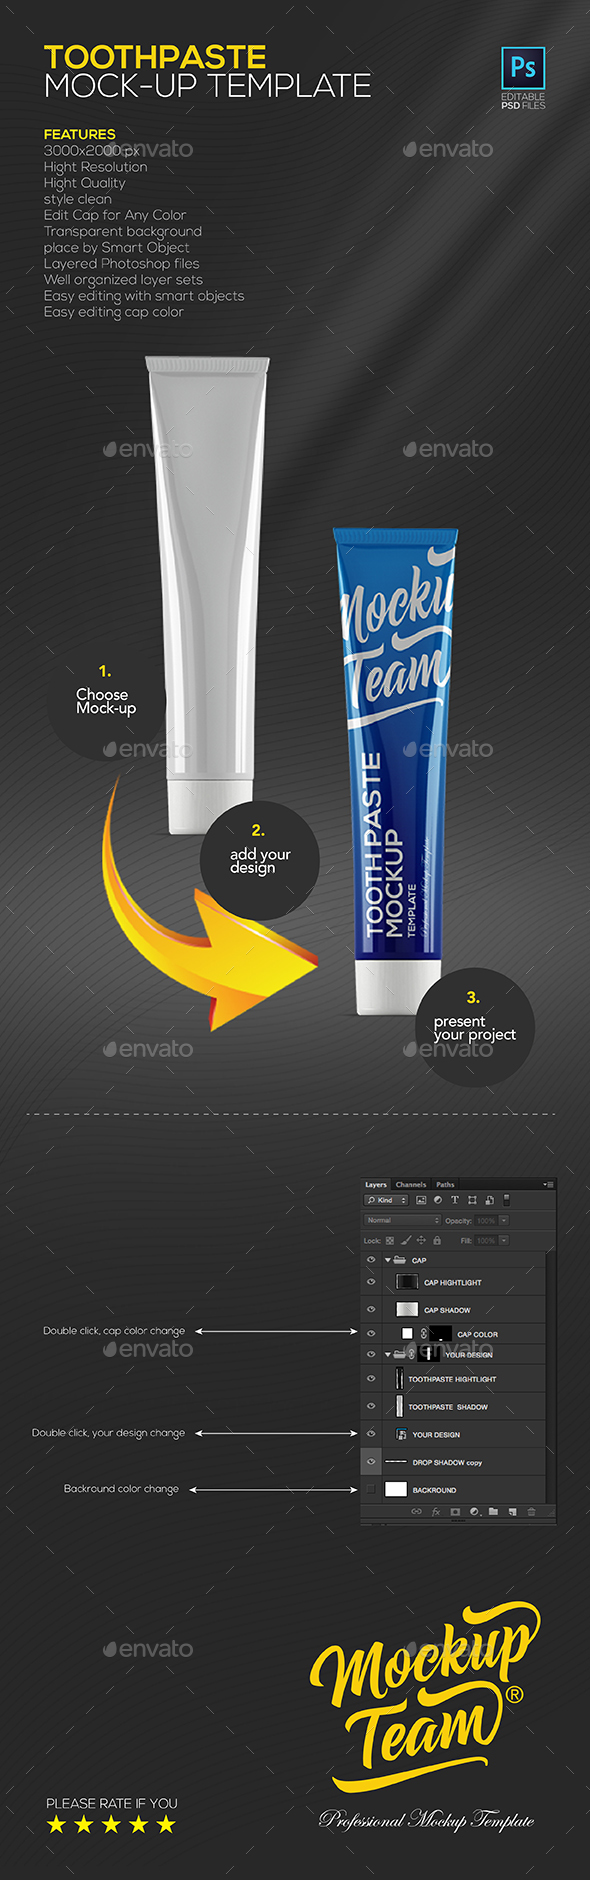 Toothpaste mock-up template